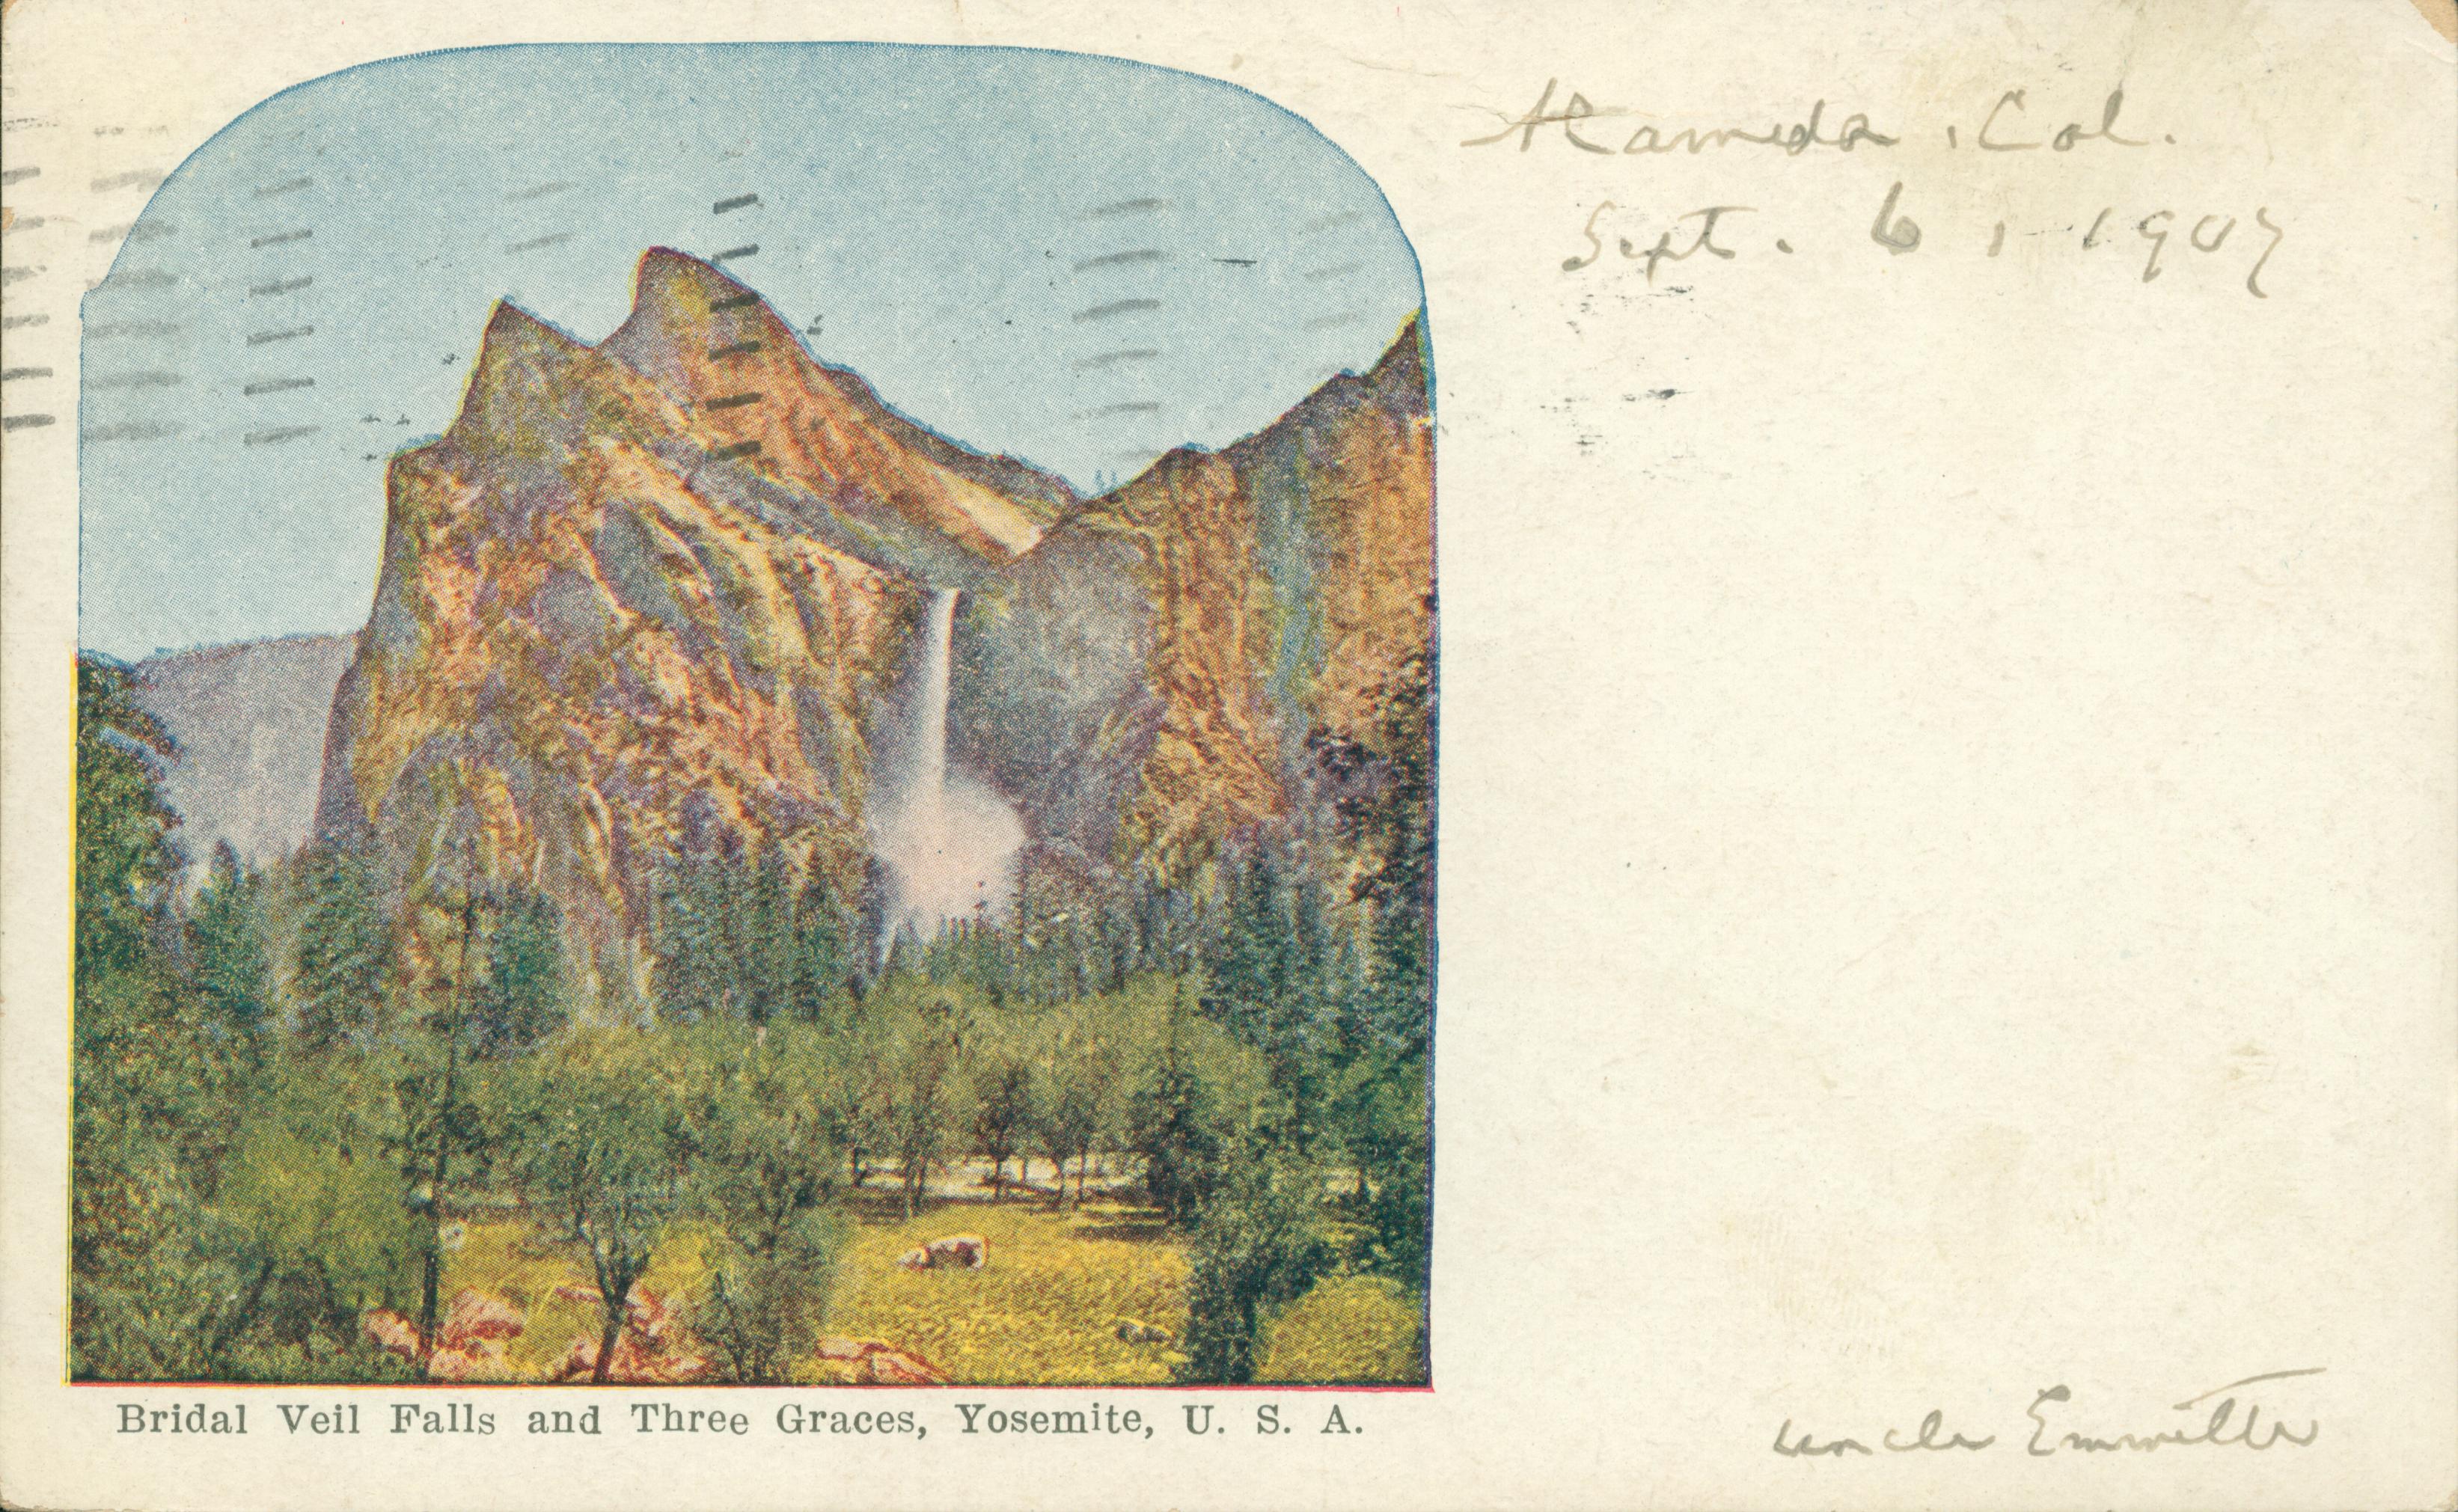 Shows a view of the valley with Bridal Veil Falls and the Three Graces in the background